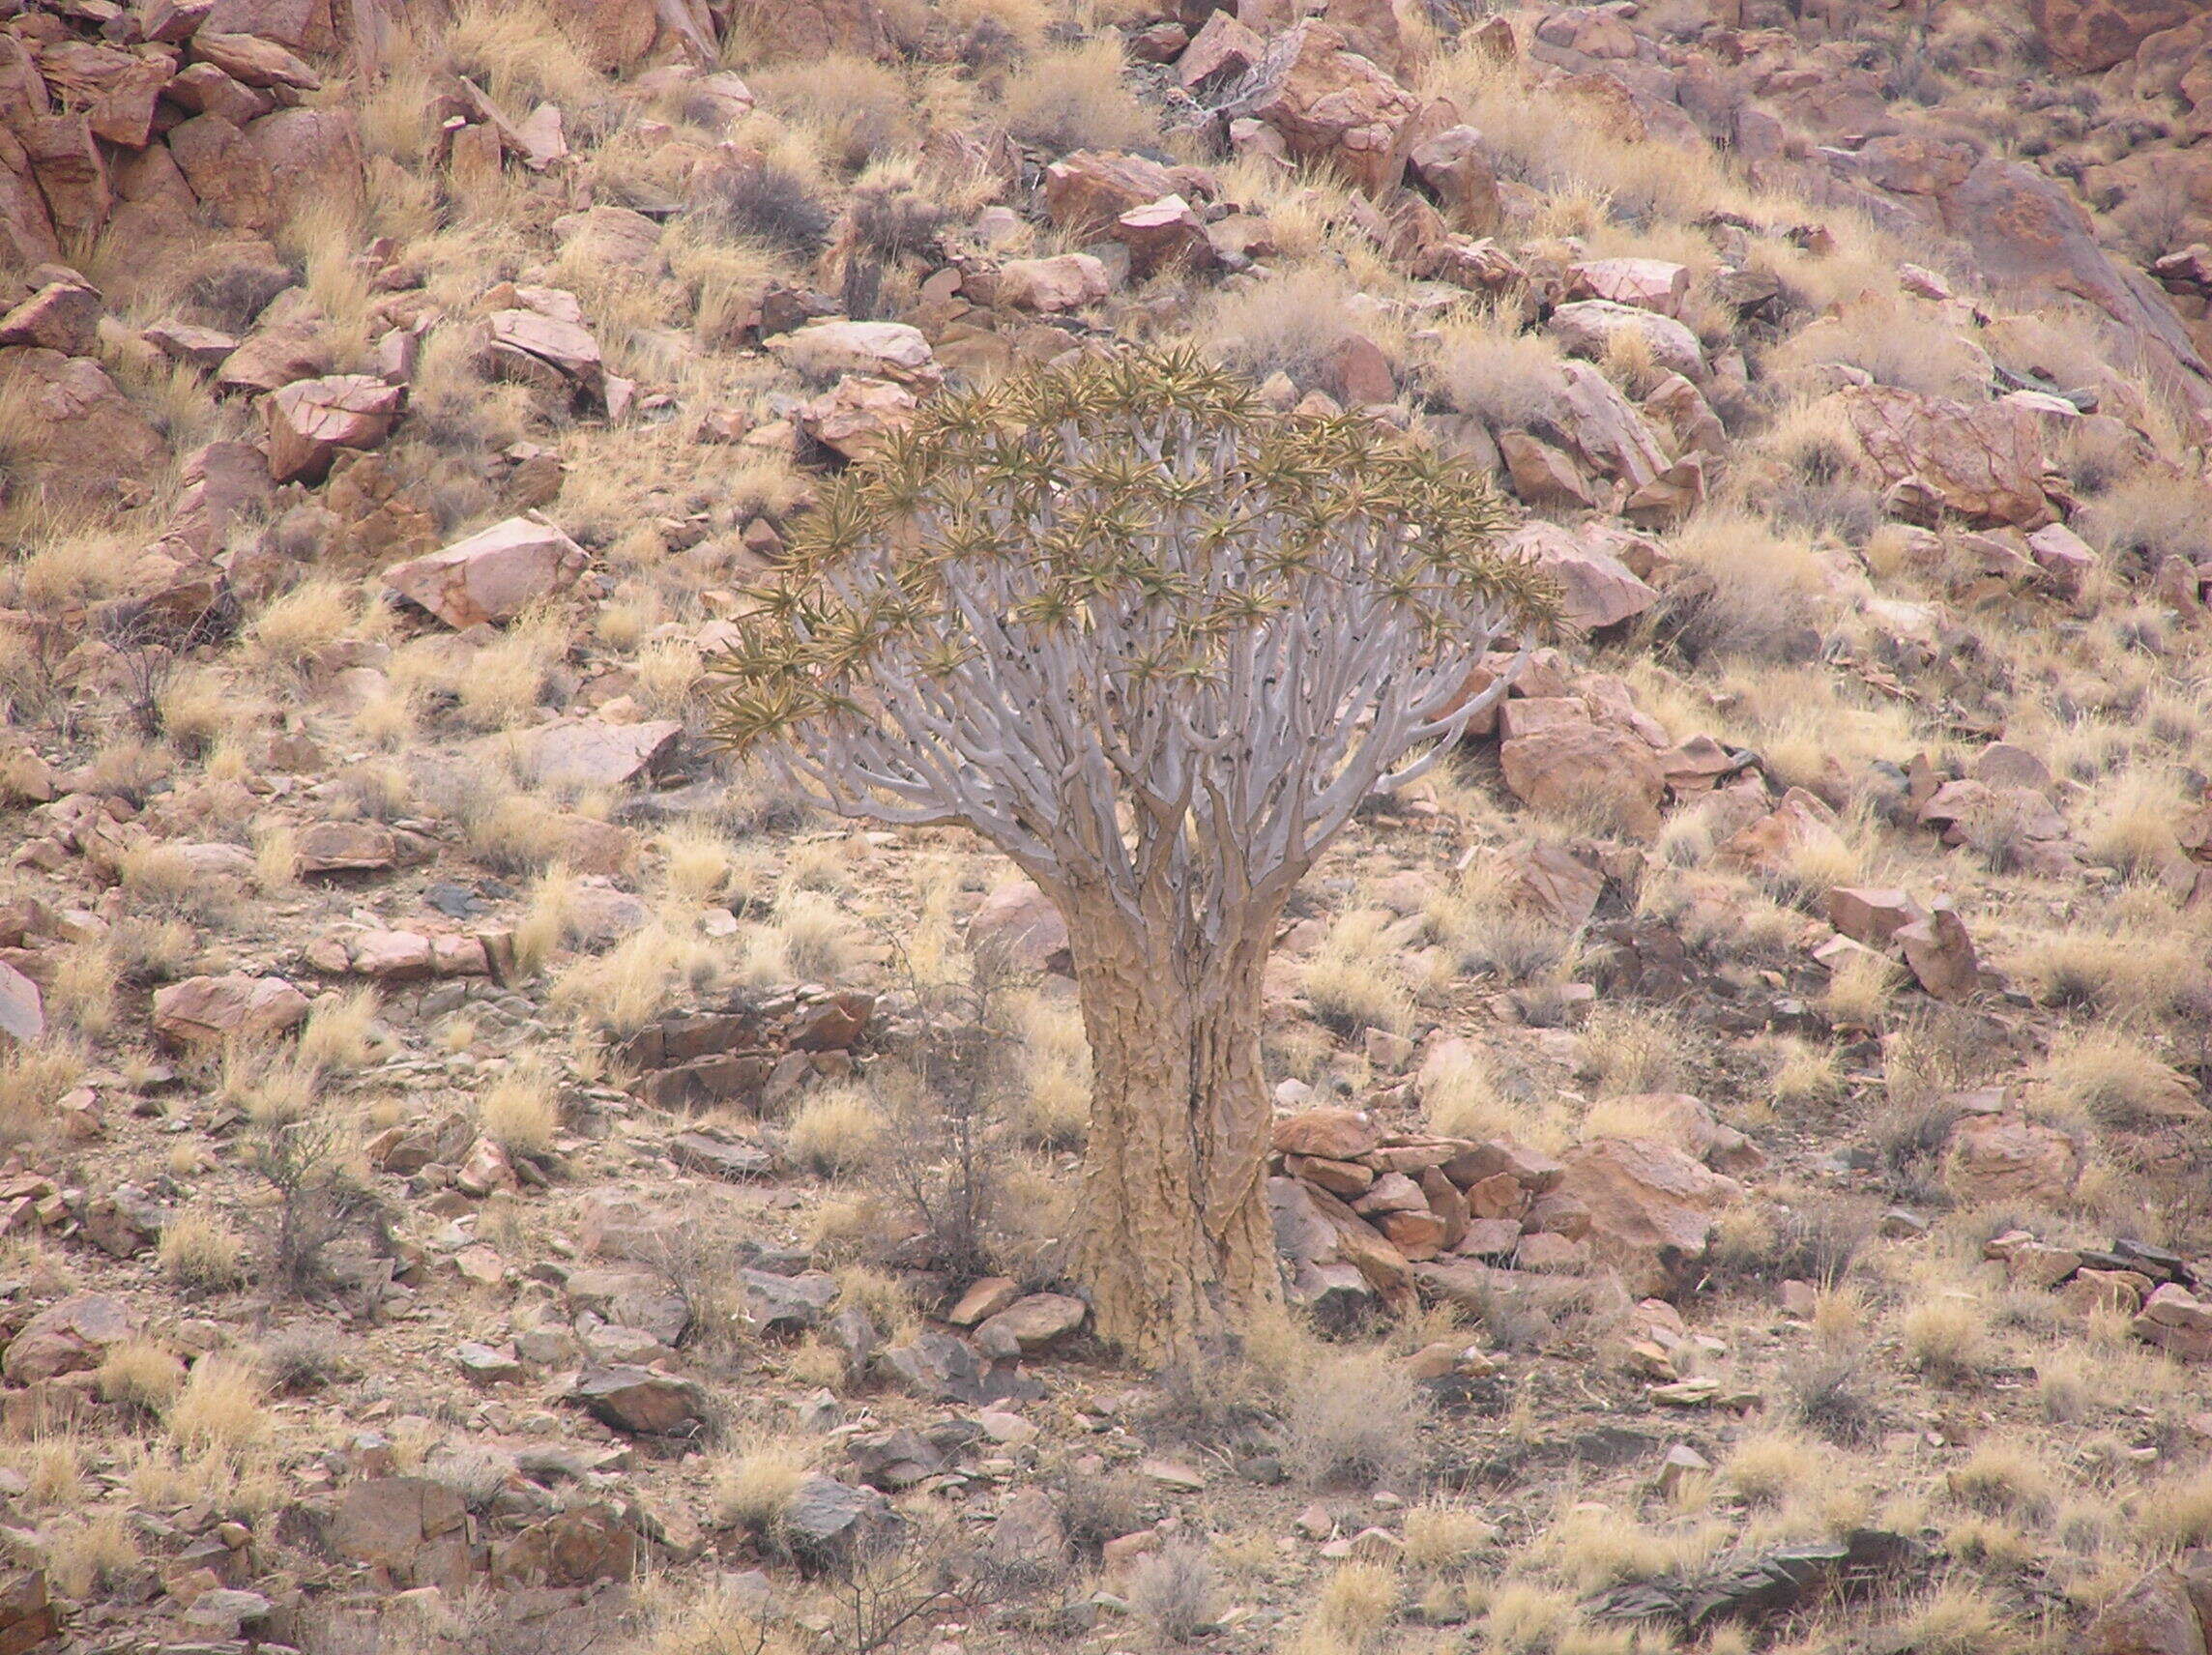 Image of Quiver tree